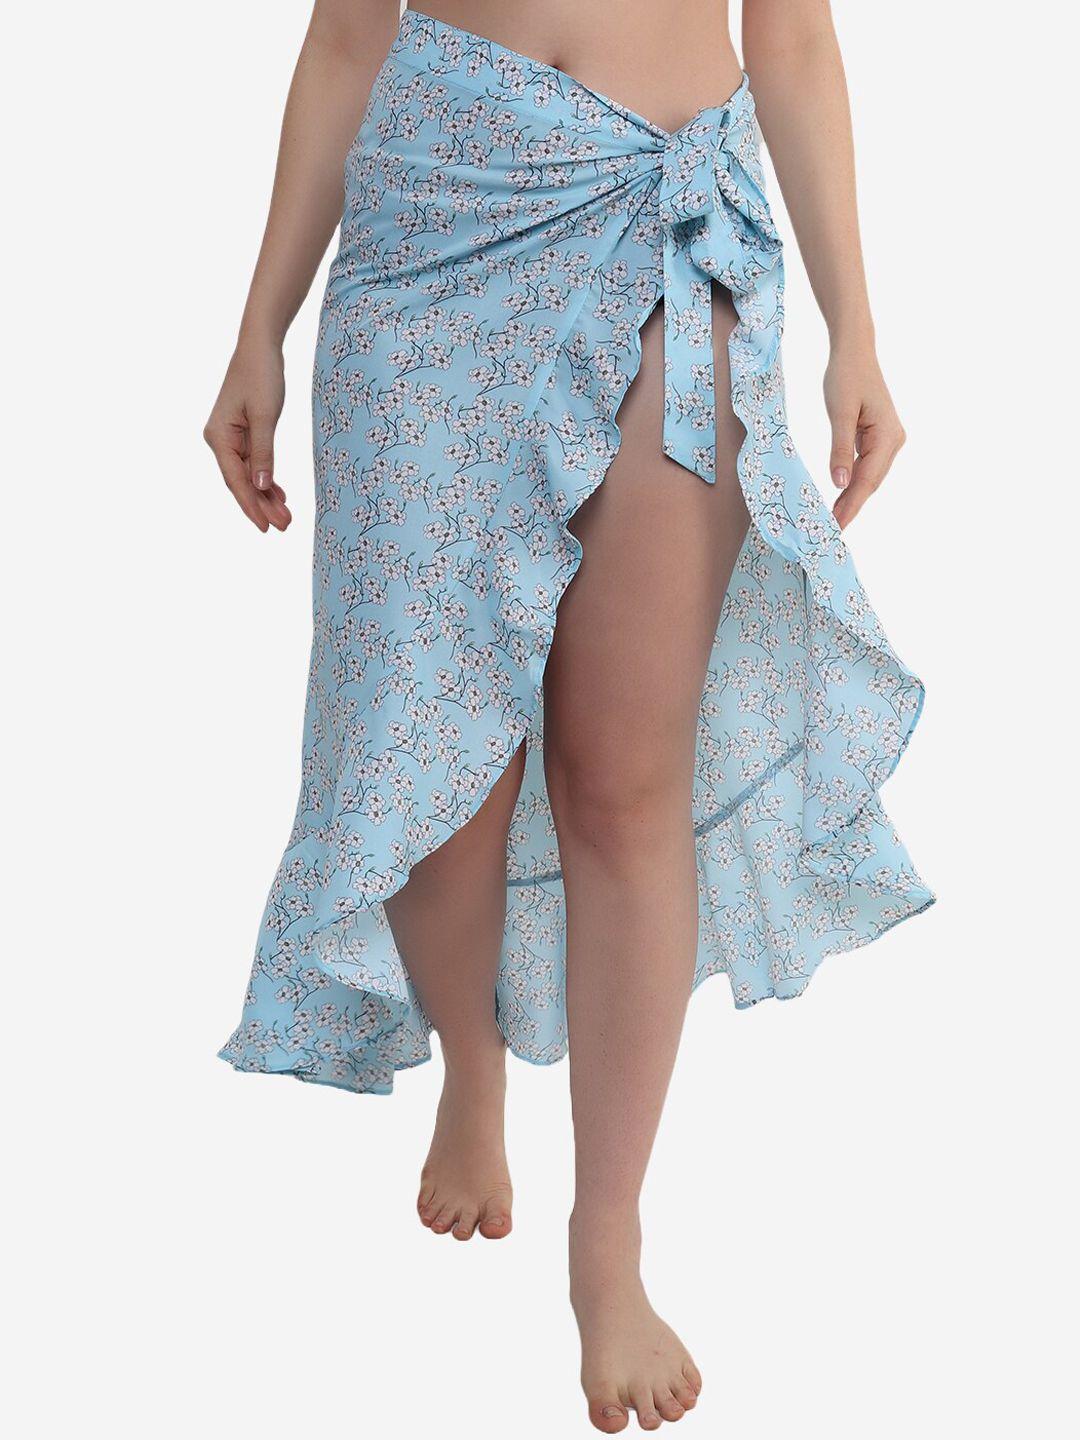 beau design women blue & white printed cover up skirt sarong